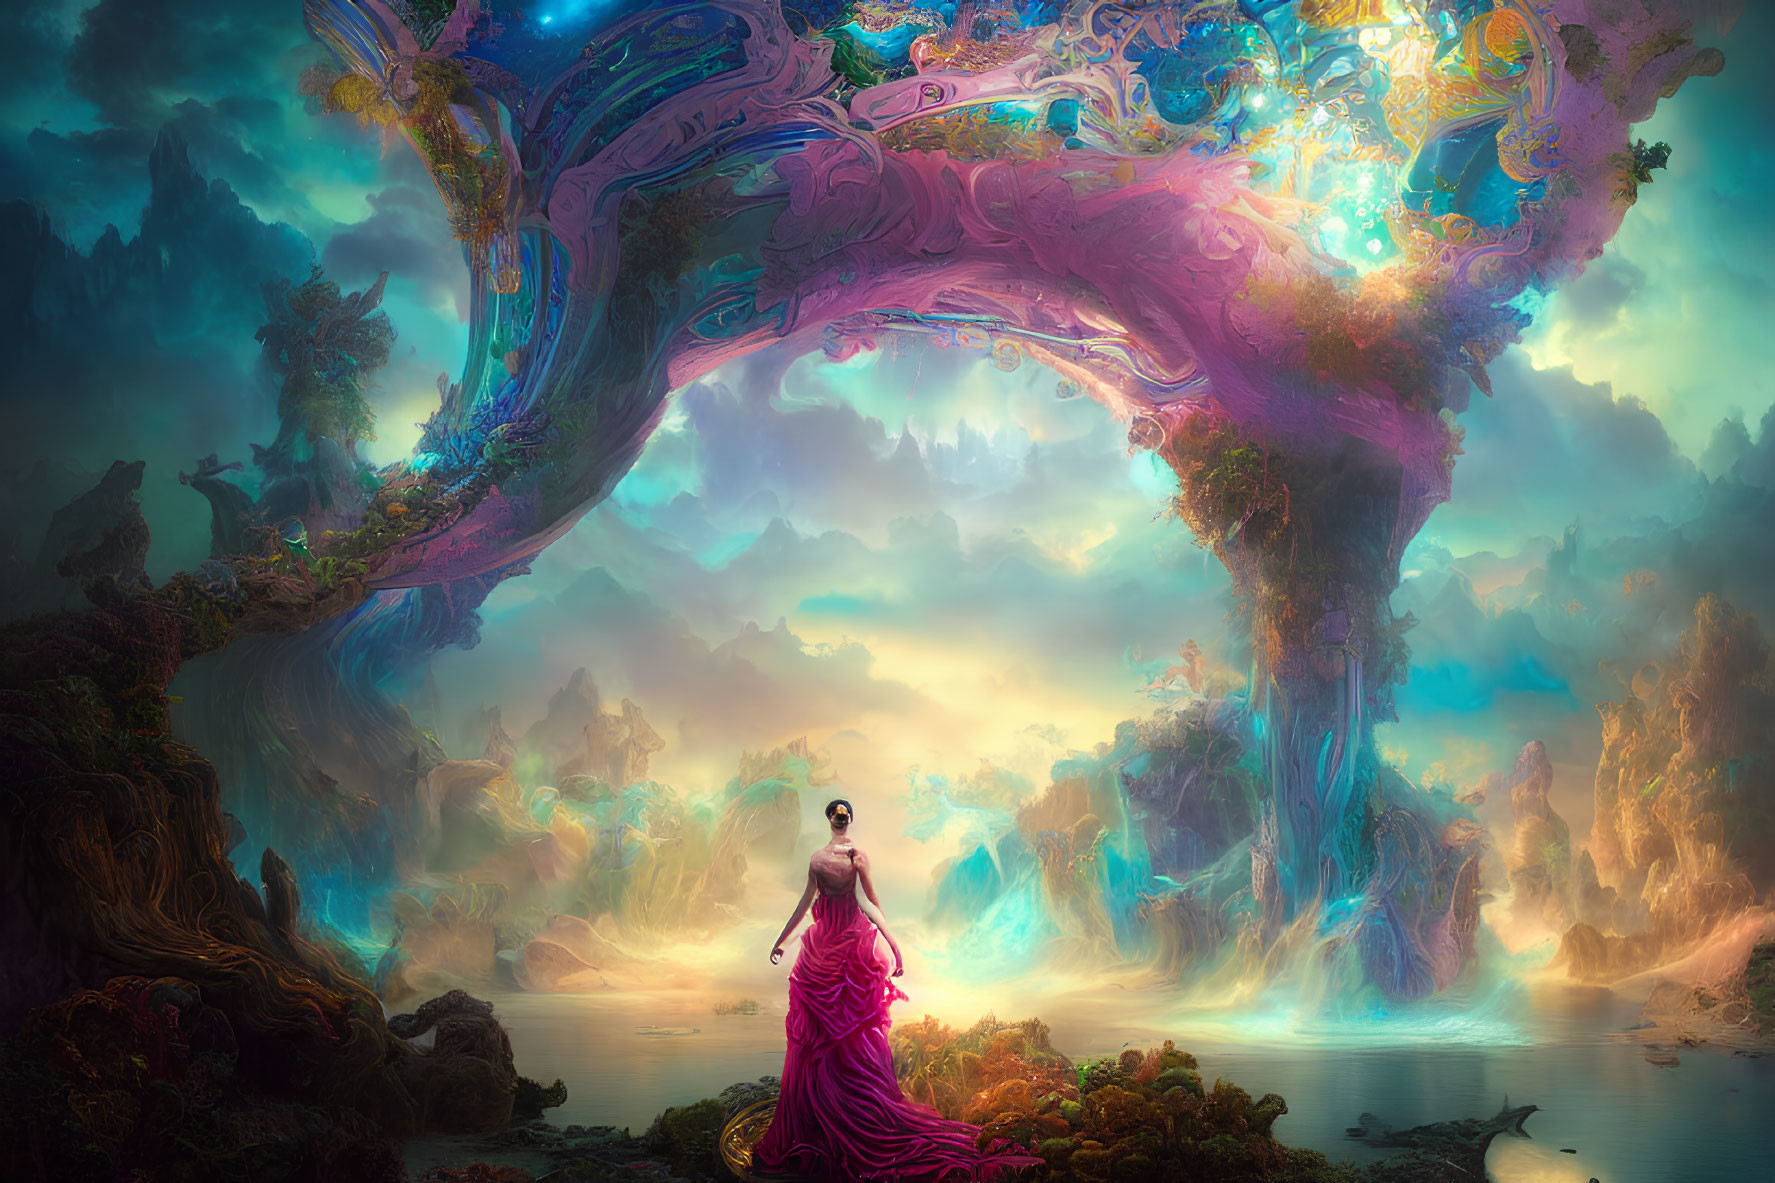 Woman in pink dress under ornate arch in vibrant, ethereal landscape